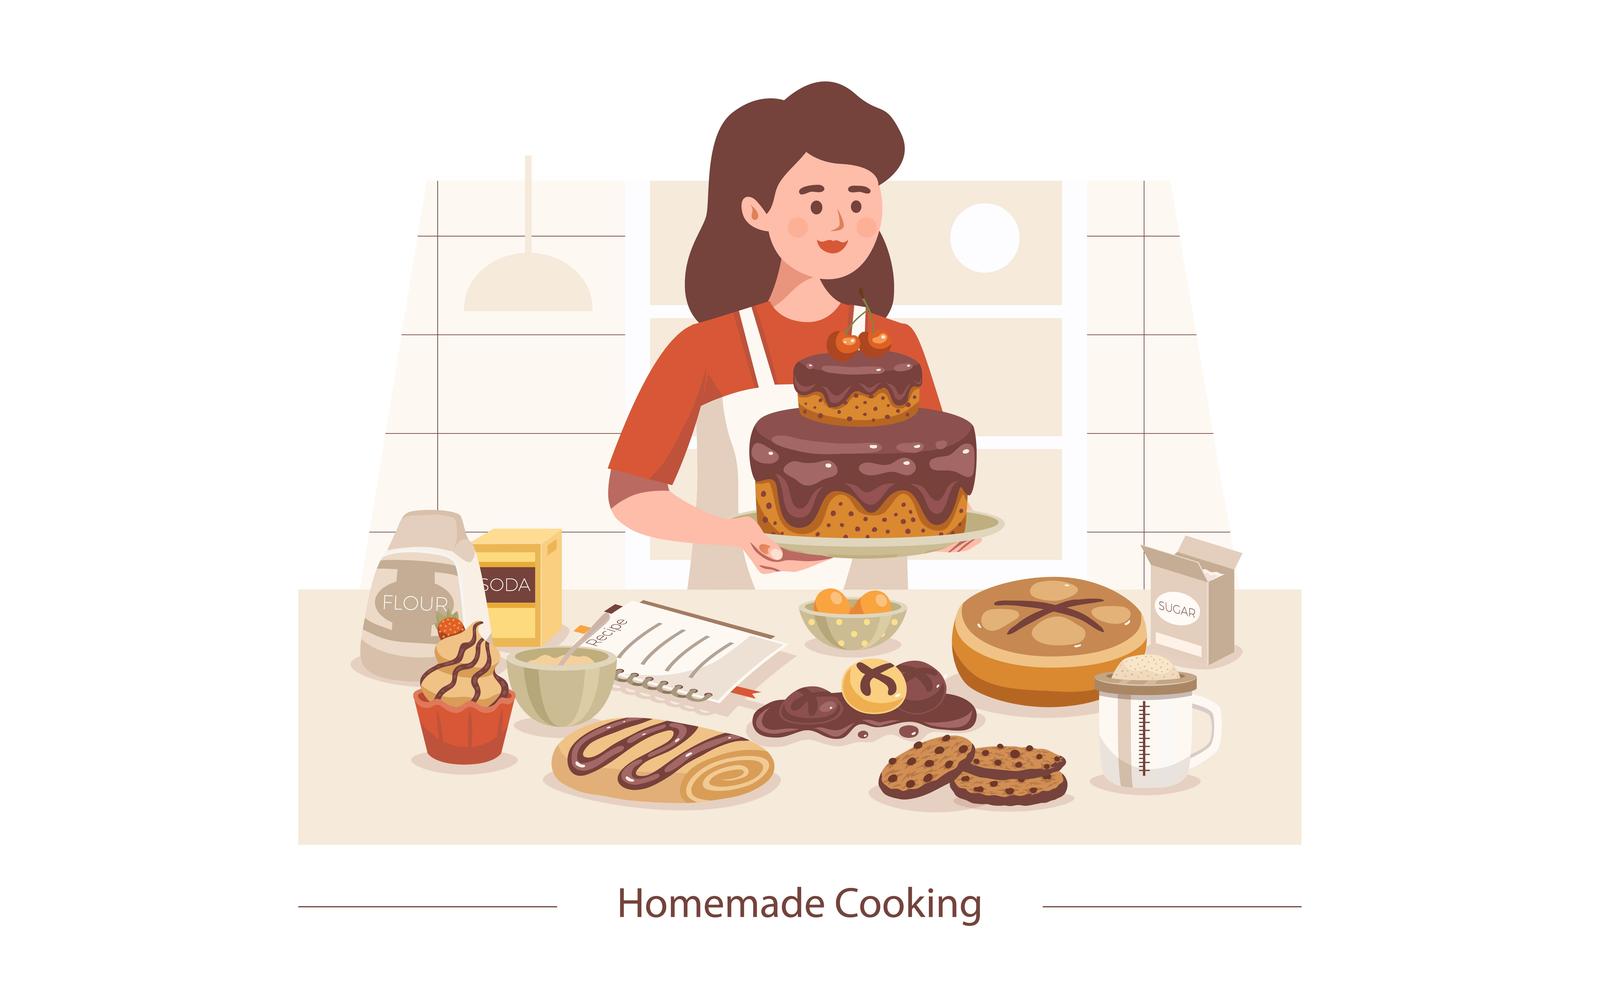 Cooking Homemade 201200301 Vector Illustration Concept